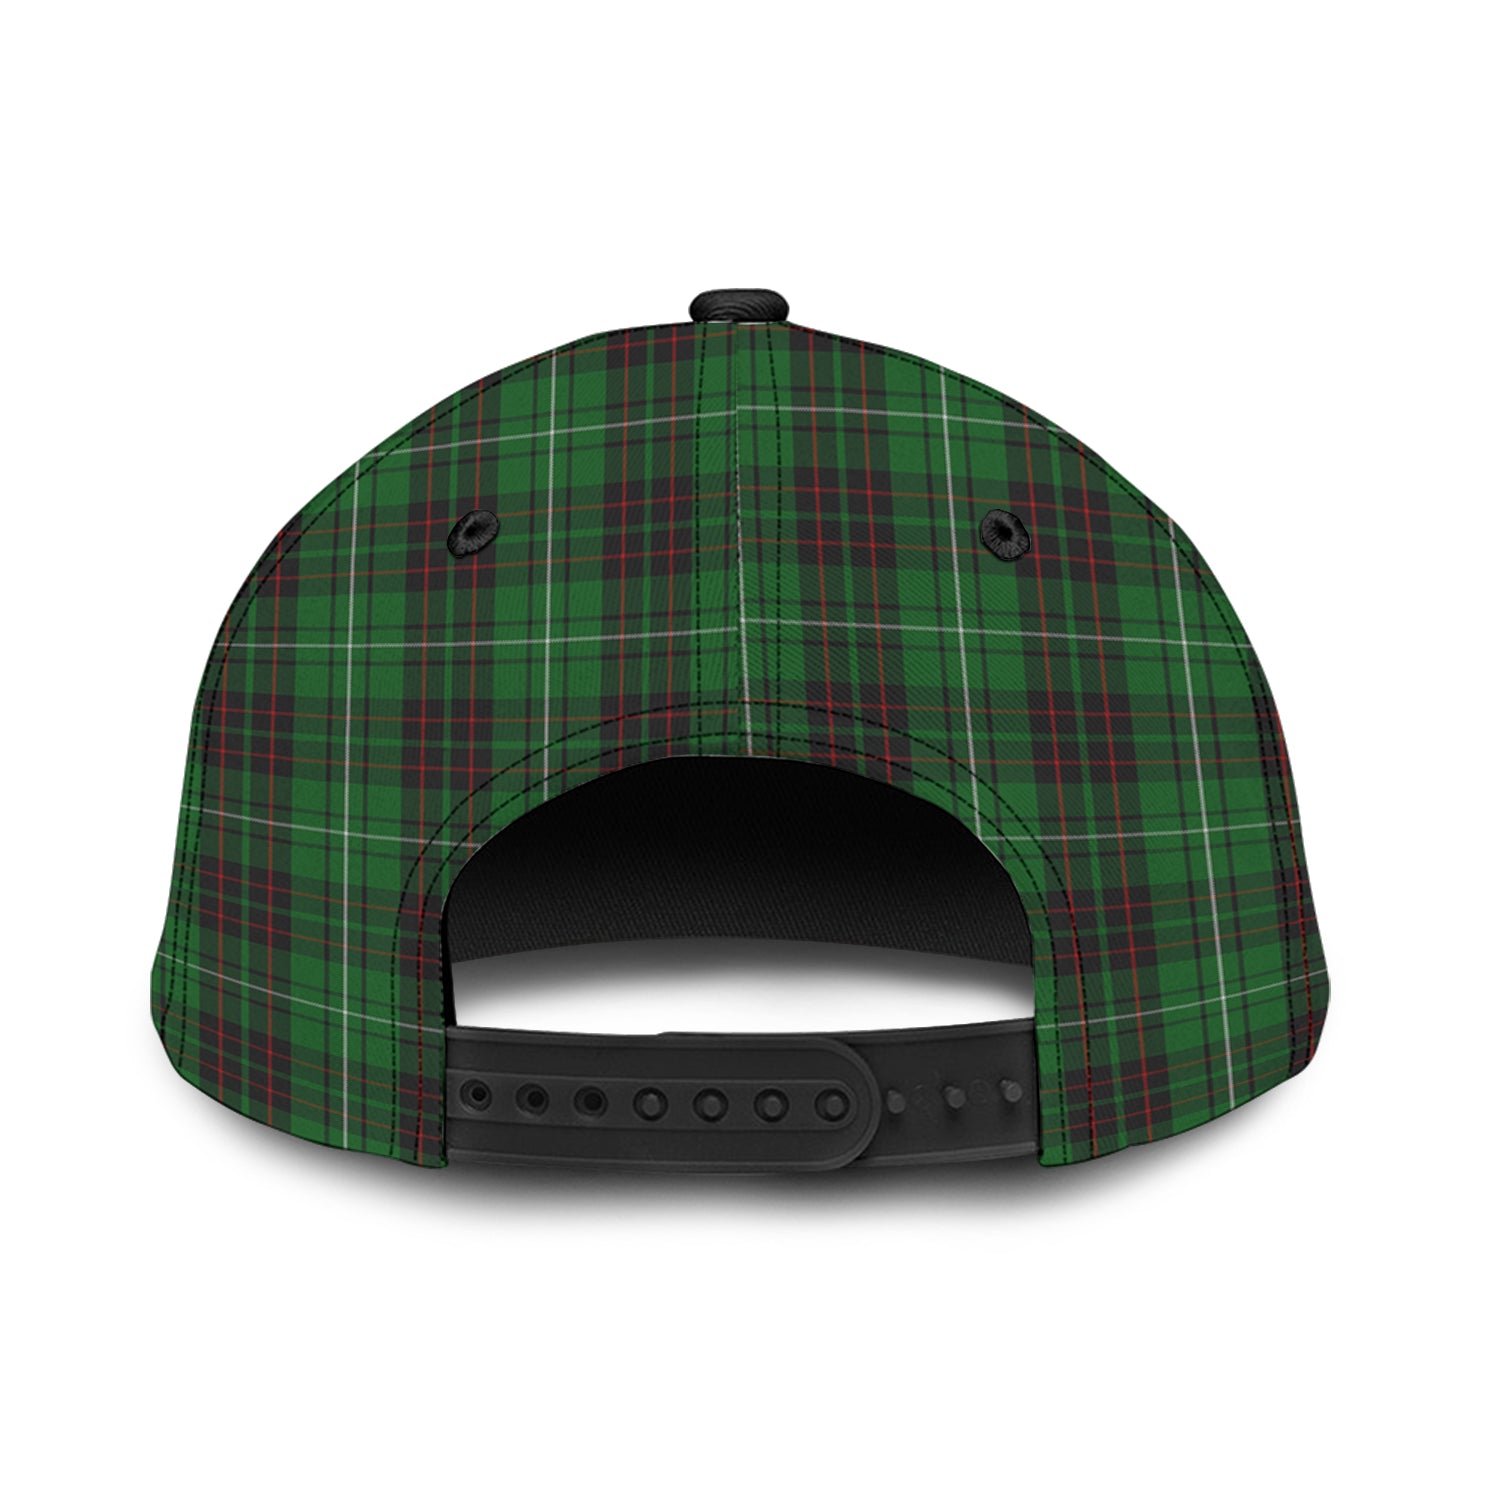 macaulay-of-lewis-tartan-classic-cap-with-family-crest